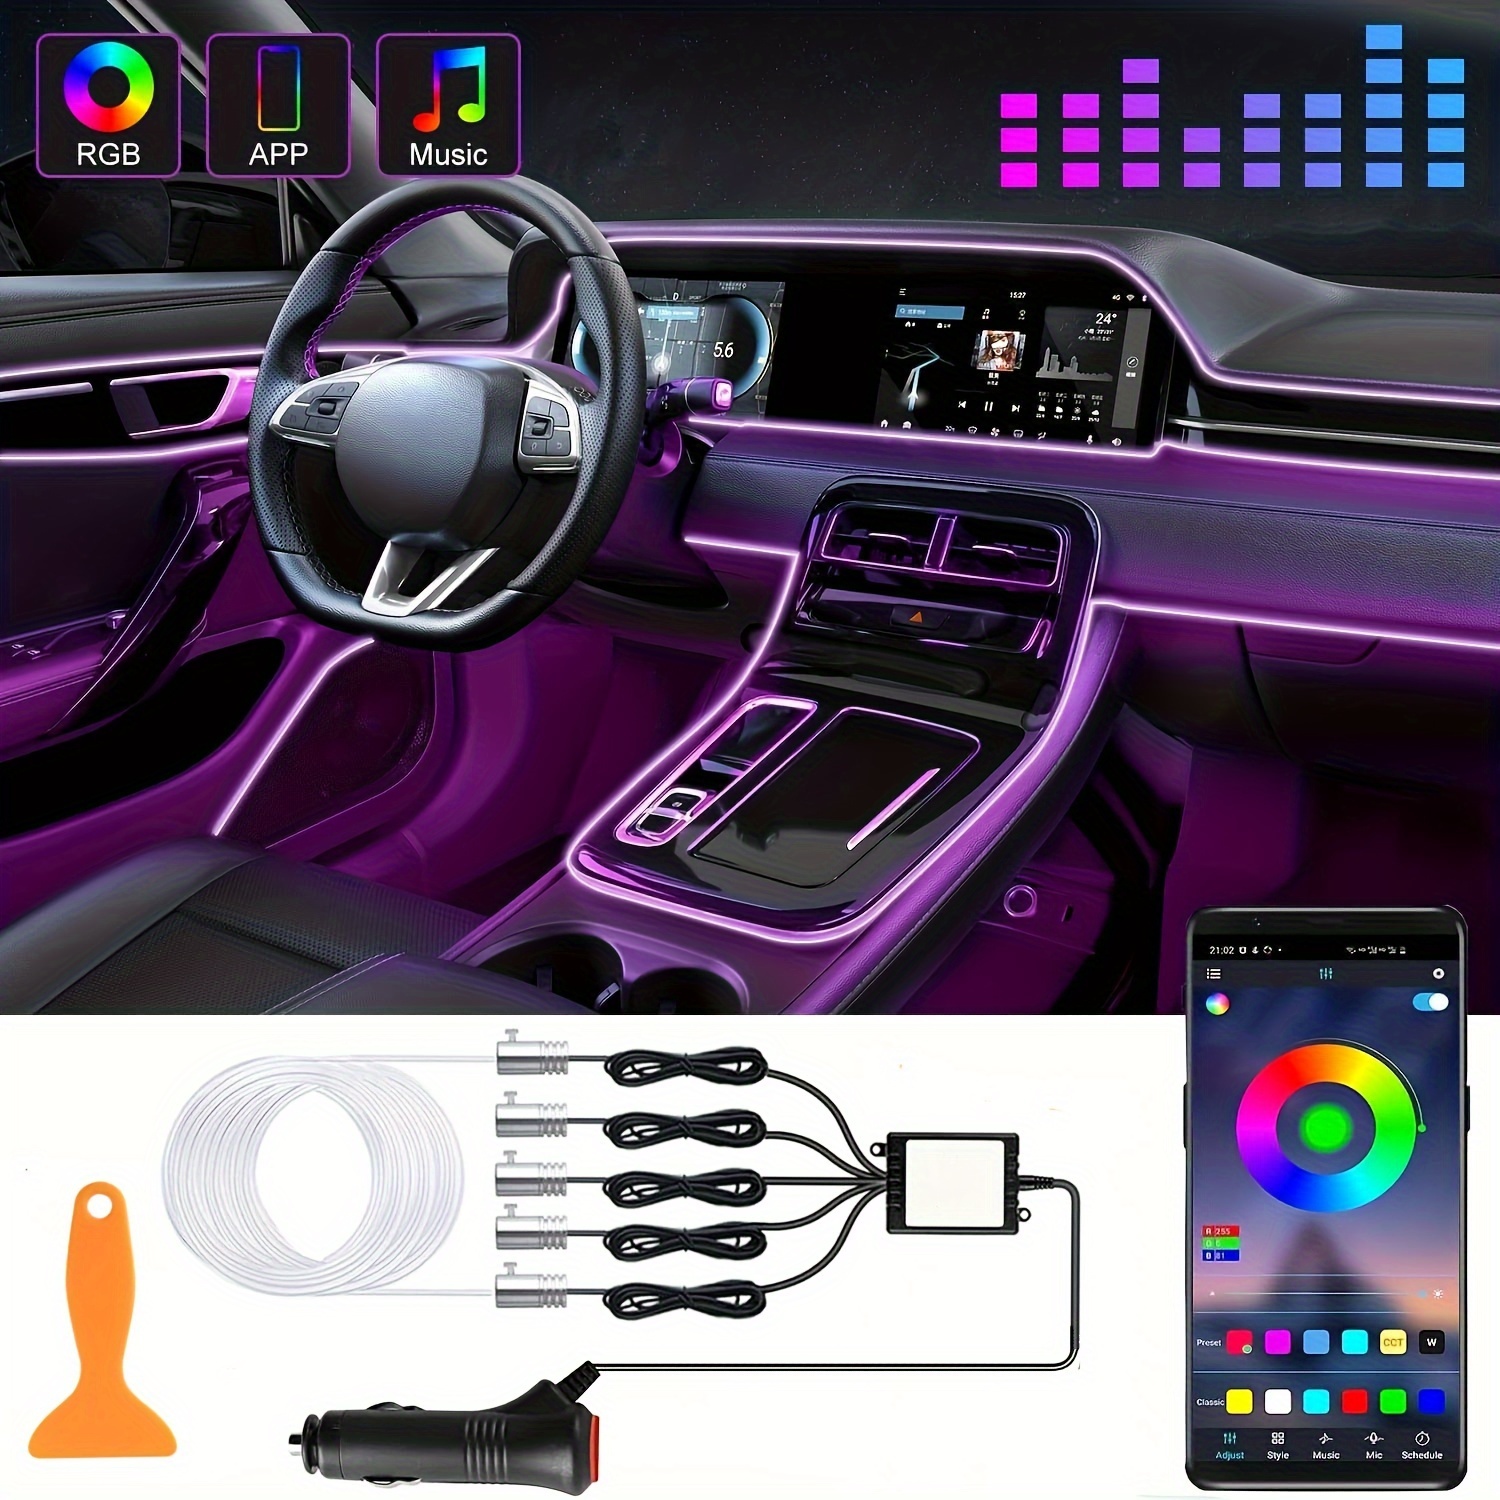  Car Led Strip Lights,Interior Lights,Ambient Lighting Kit With  RGB 16 Million Colors Fiber Optics&Music Sync Rhythm,USB Neon Light  Accessories for Center Console&Dashboard,Upgraded Version : Automotive